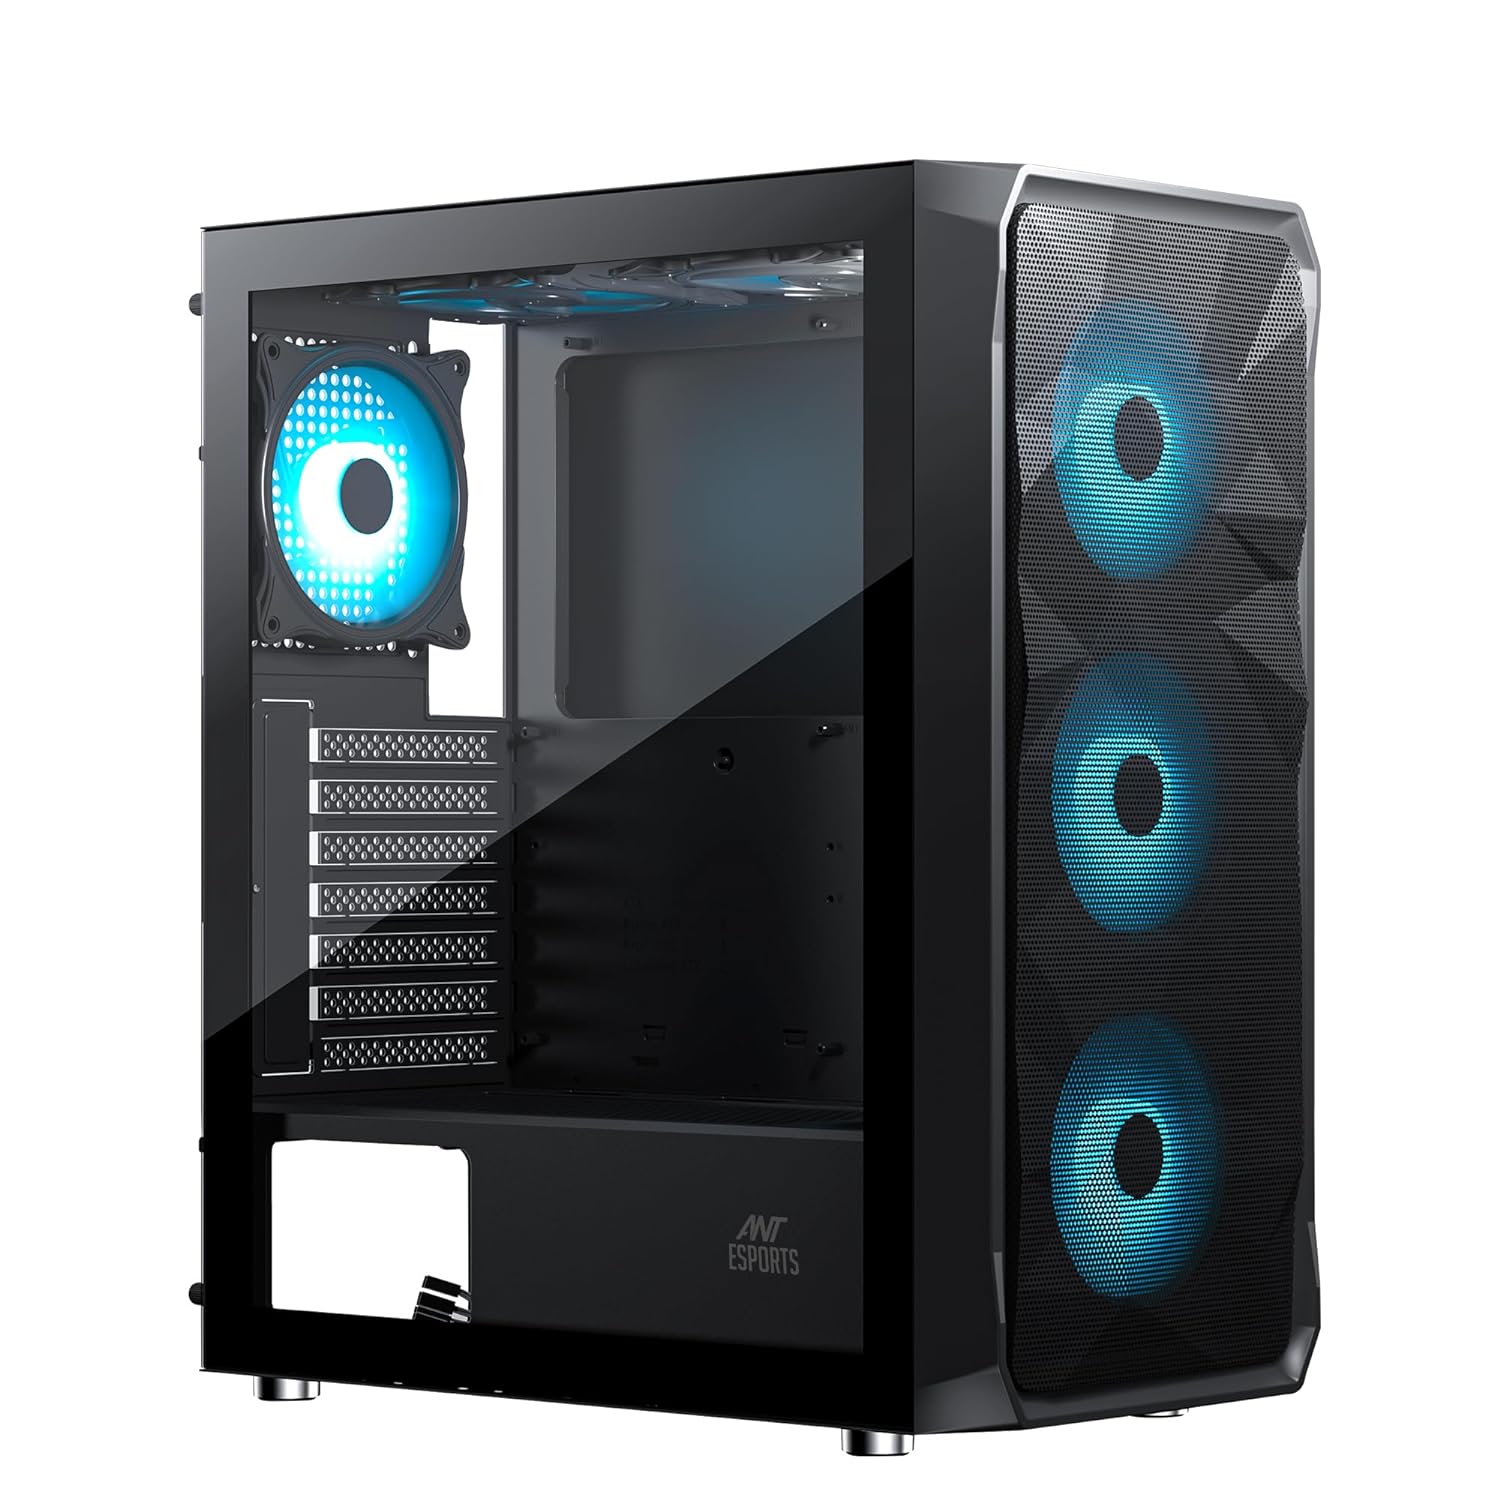 Ant Esports ICE-112 Black Gaming Cabinet - ATX/Micro-ATX/ITX, 3 Front Fans, 340mm VGA Card Length